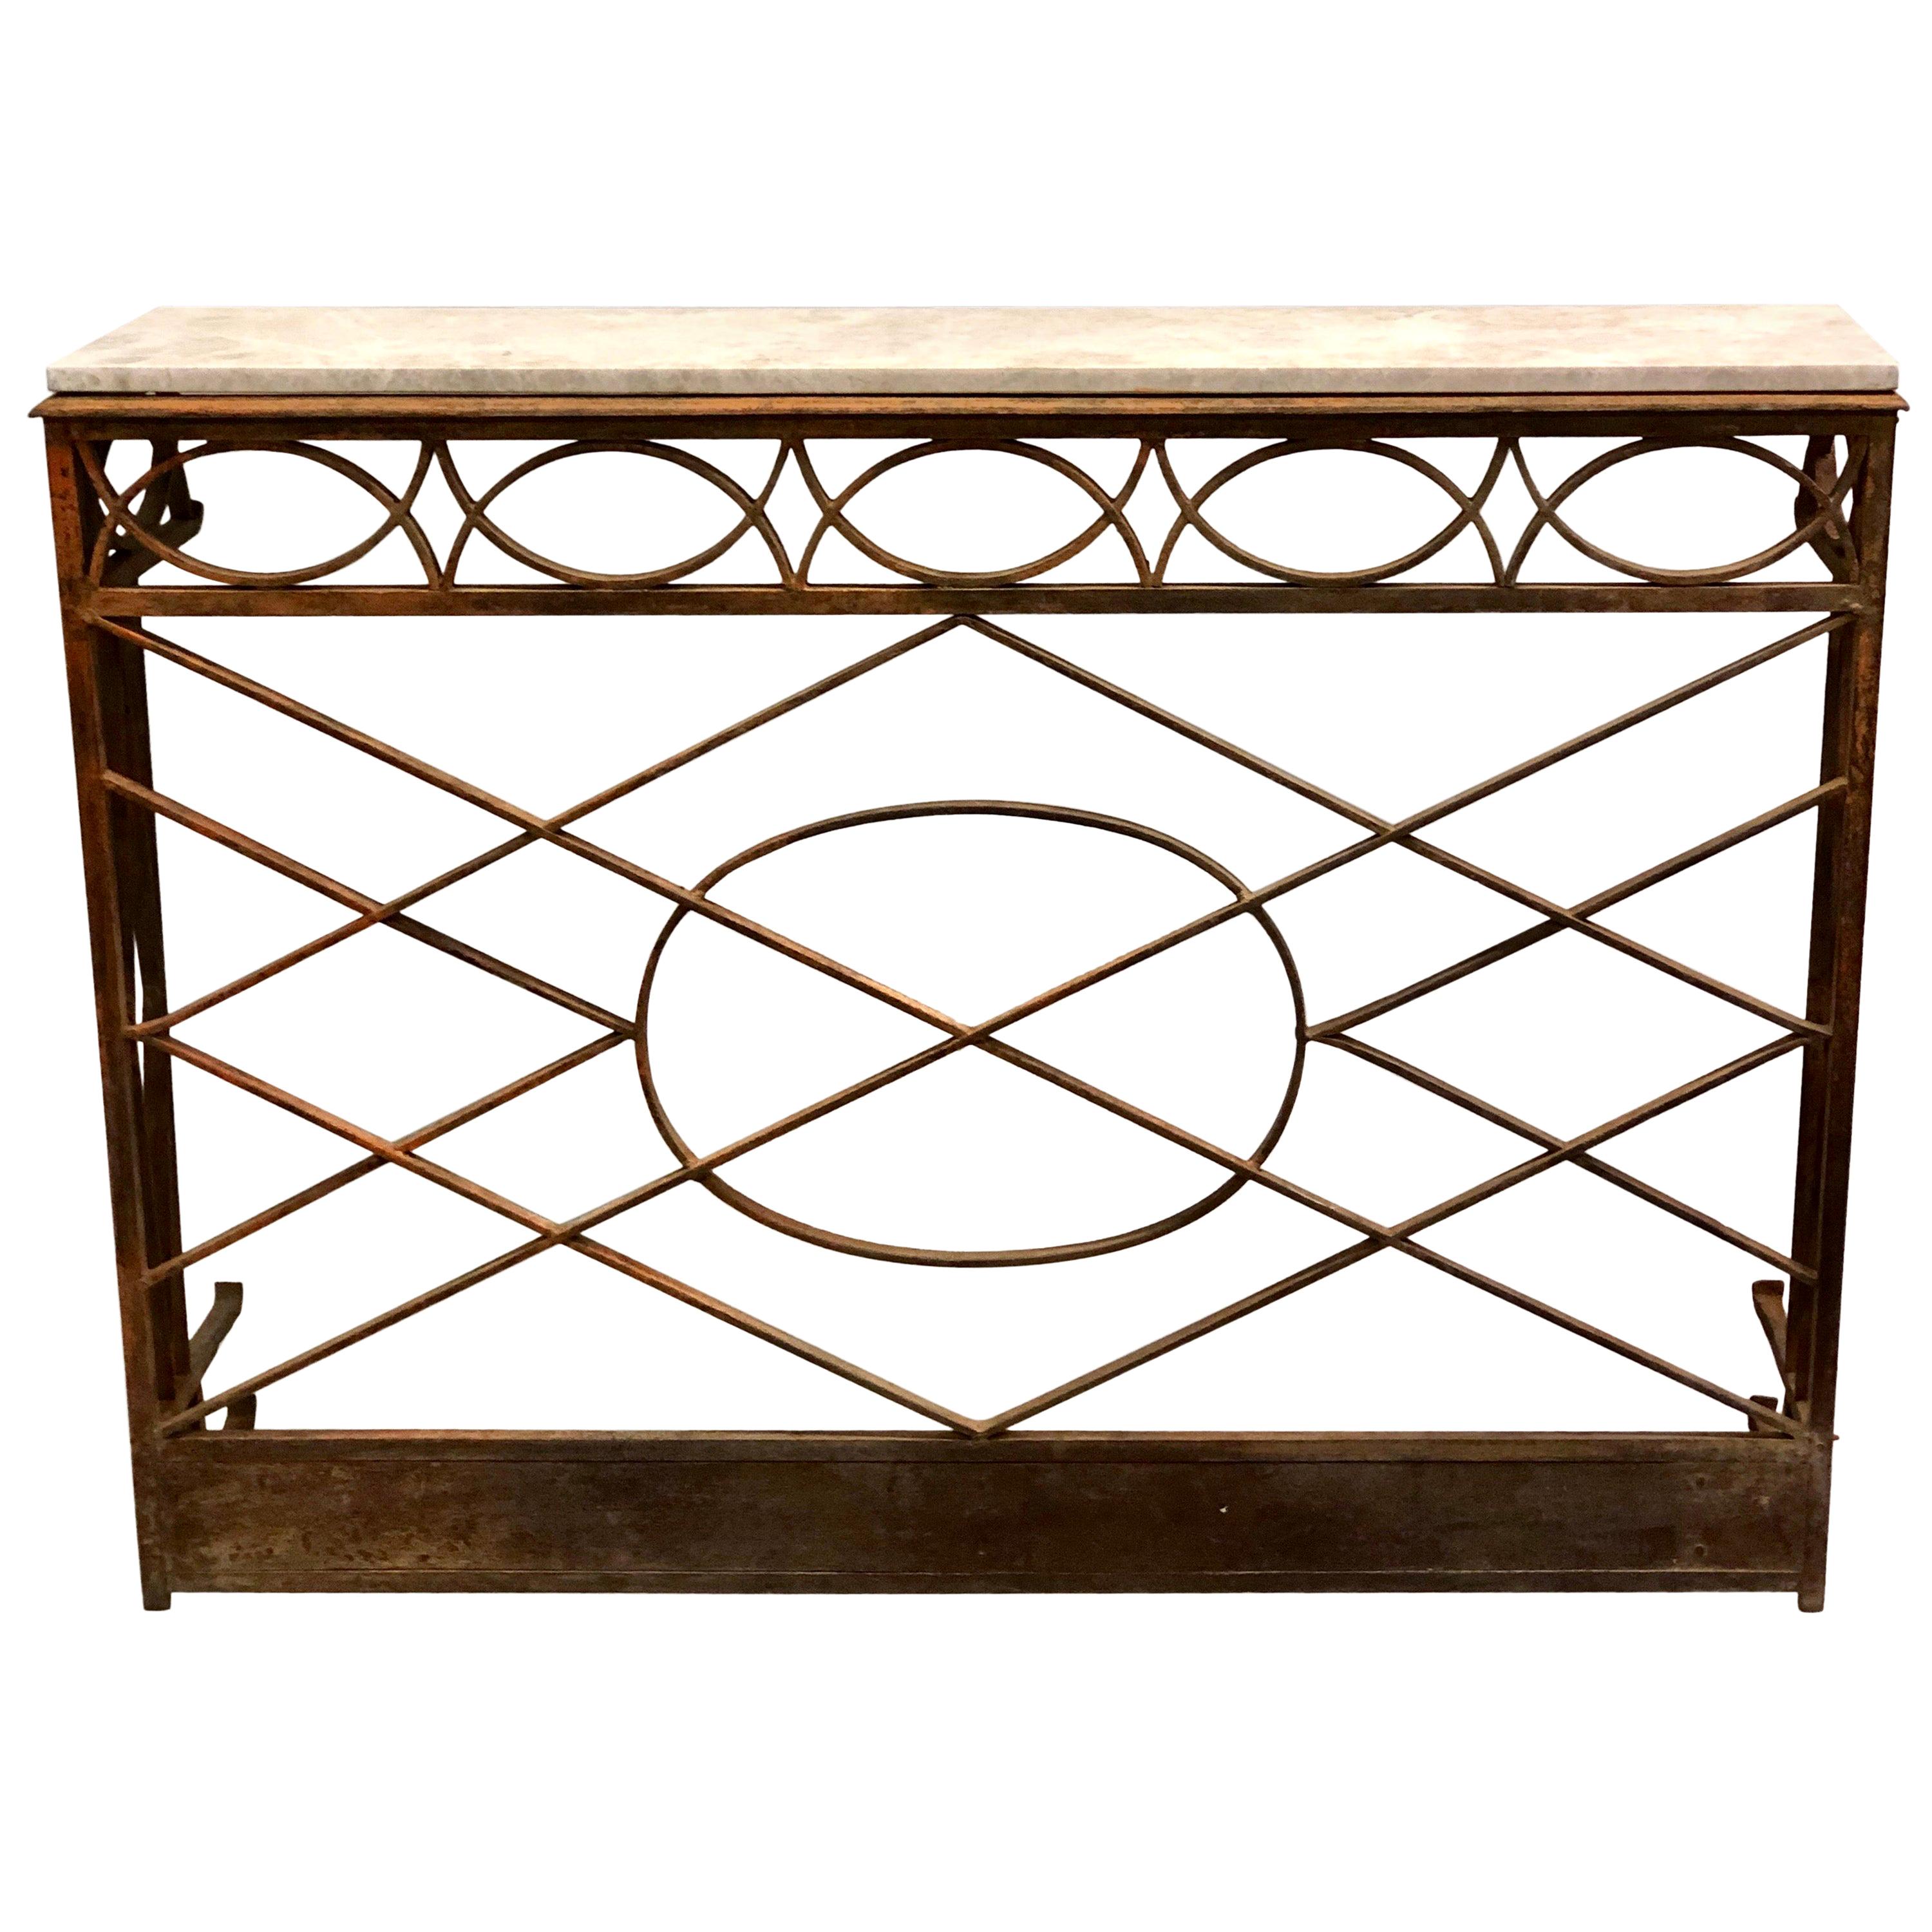 French Modern Neoclassical Wrought Iron and Limestone Console, circa 1860-1880